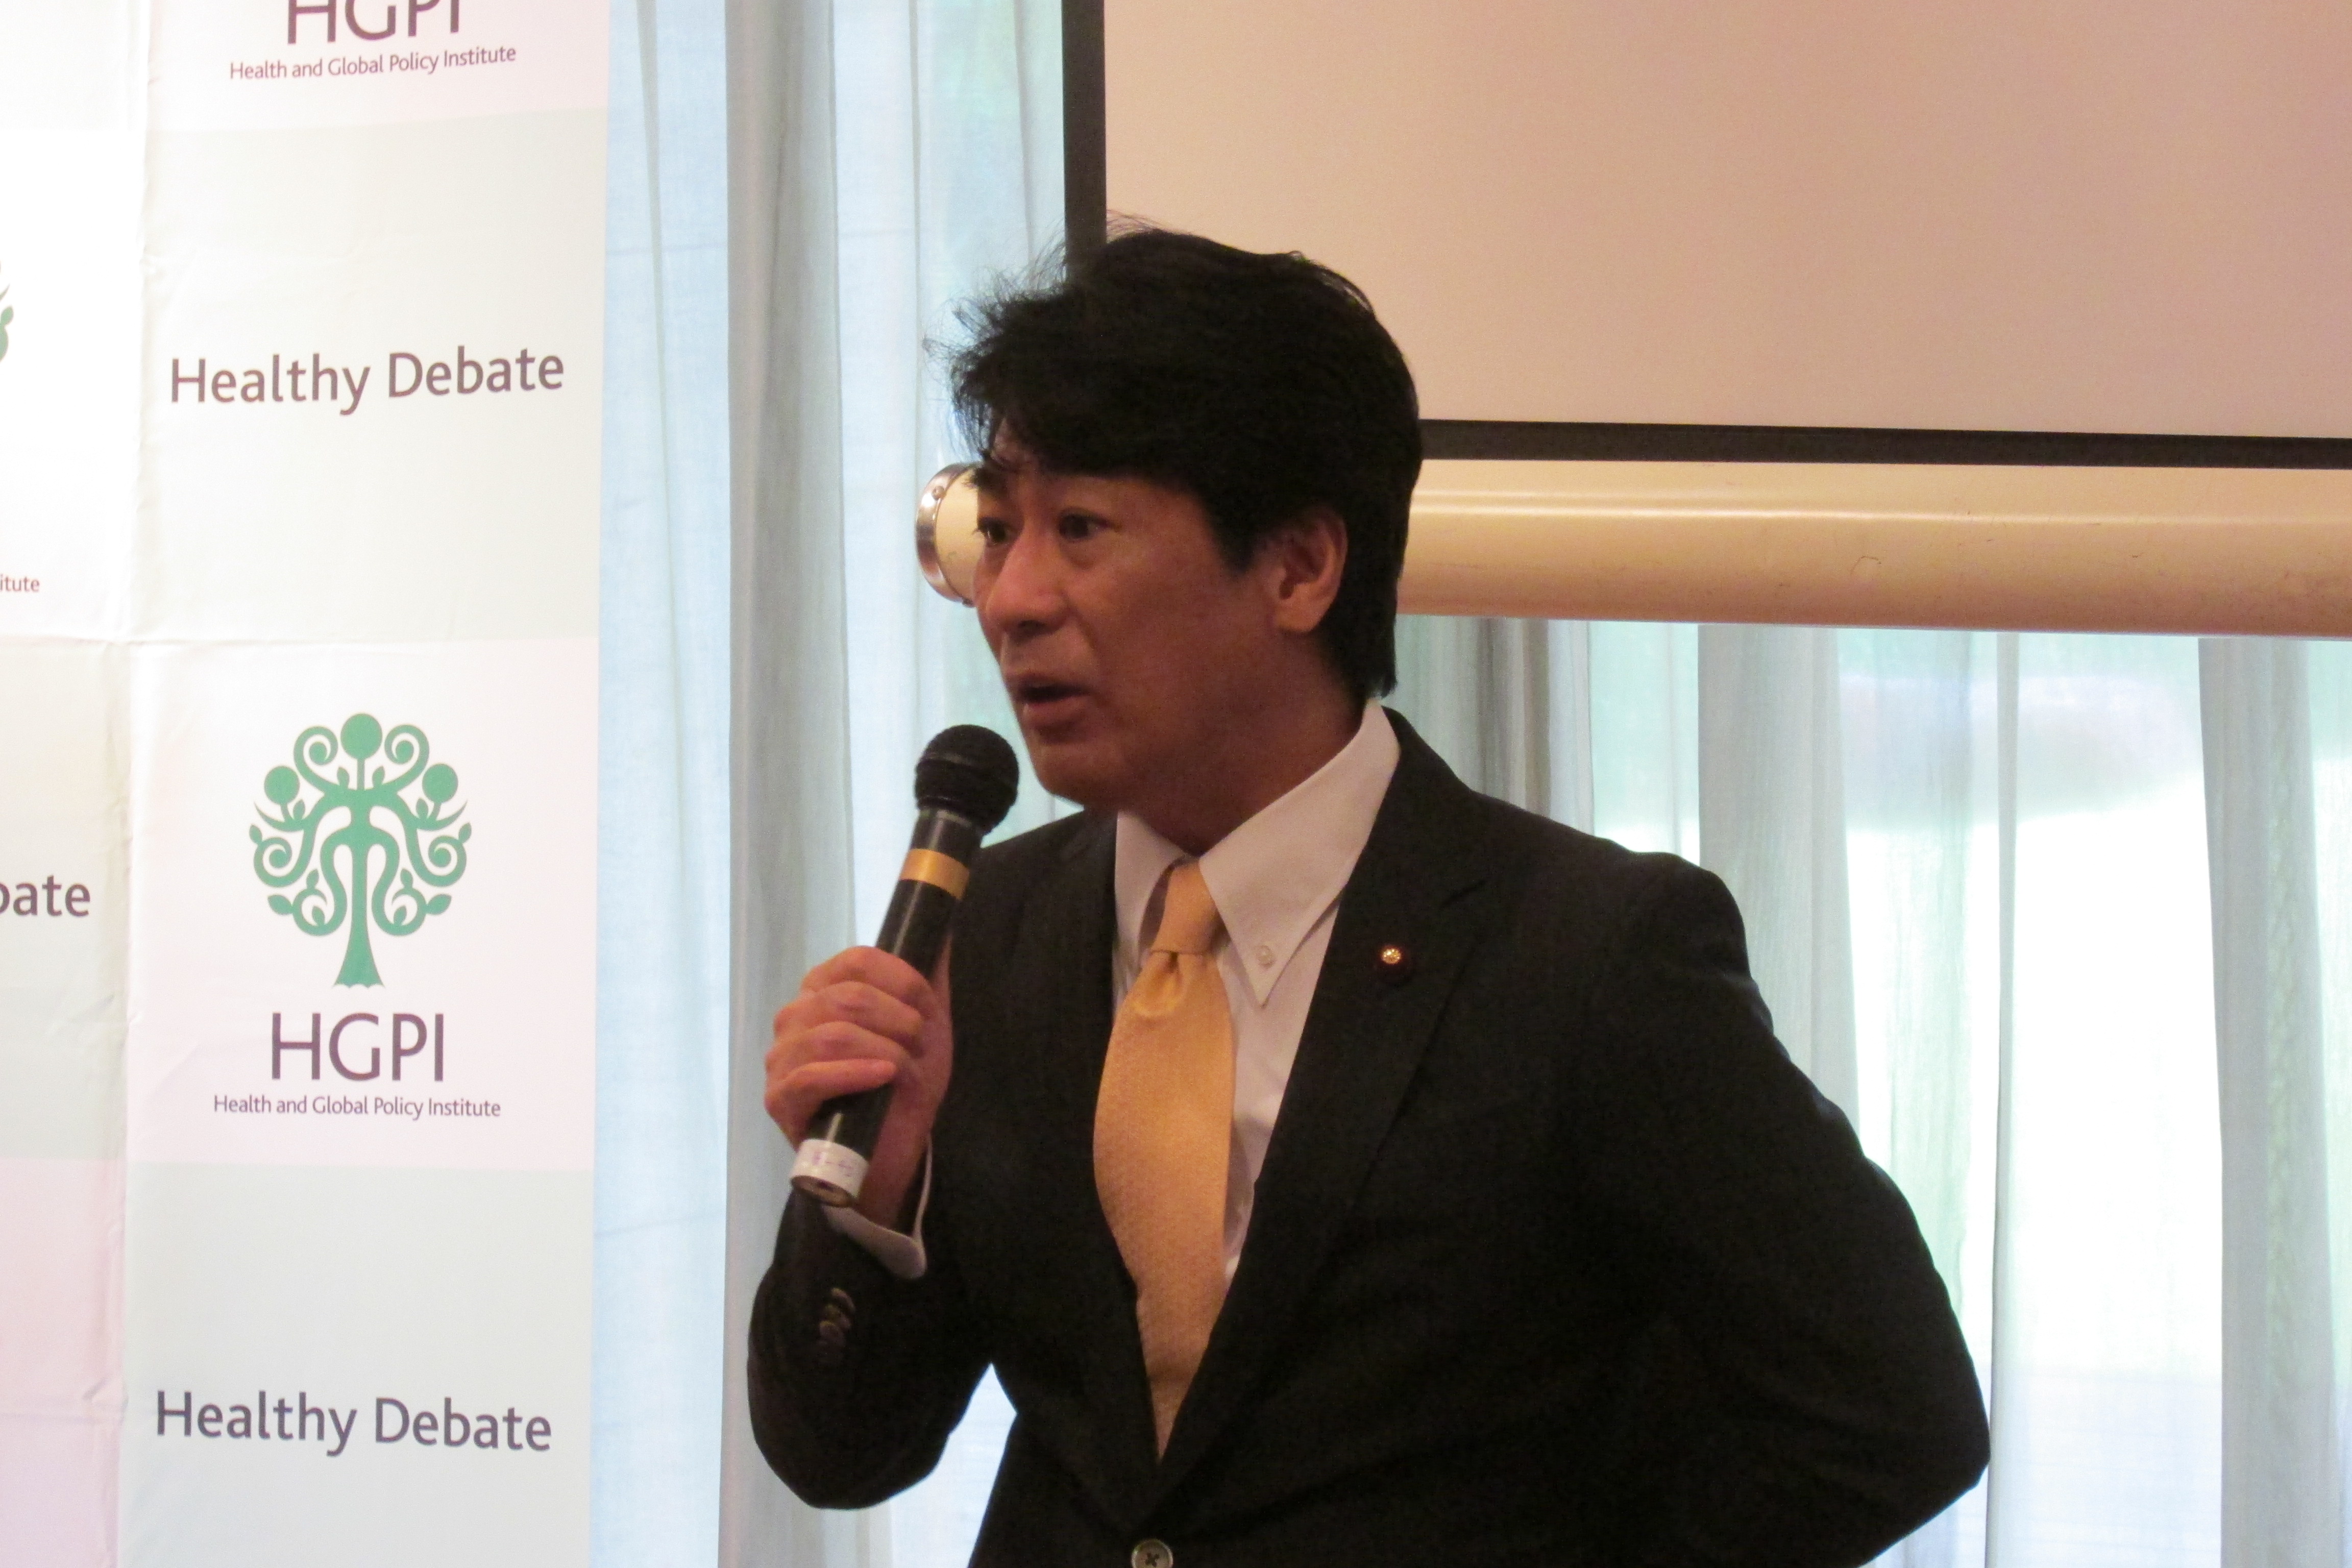 [Event Report] The 27th Special Breakfast Meeting“617 Days as Minister of the MHLW” featuring former Minister of Health, Labour and Welfare, Mr. Norihisa Tamura